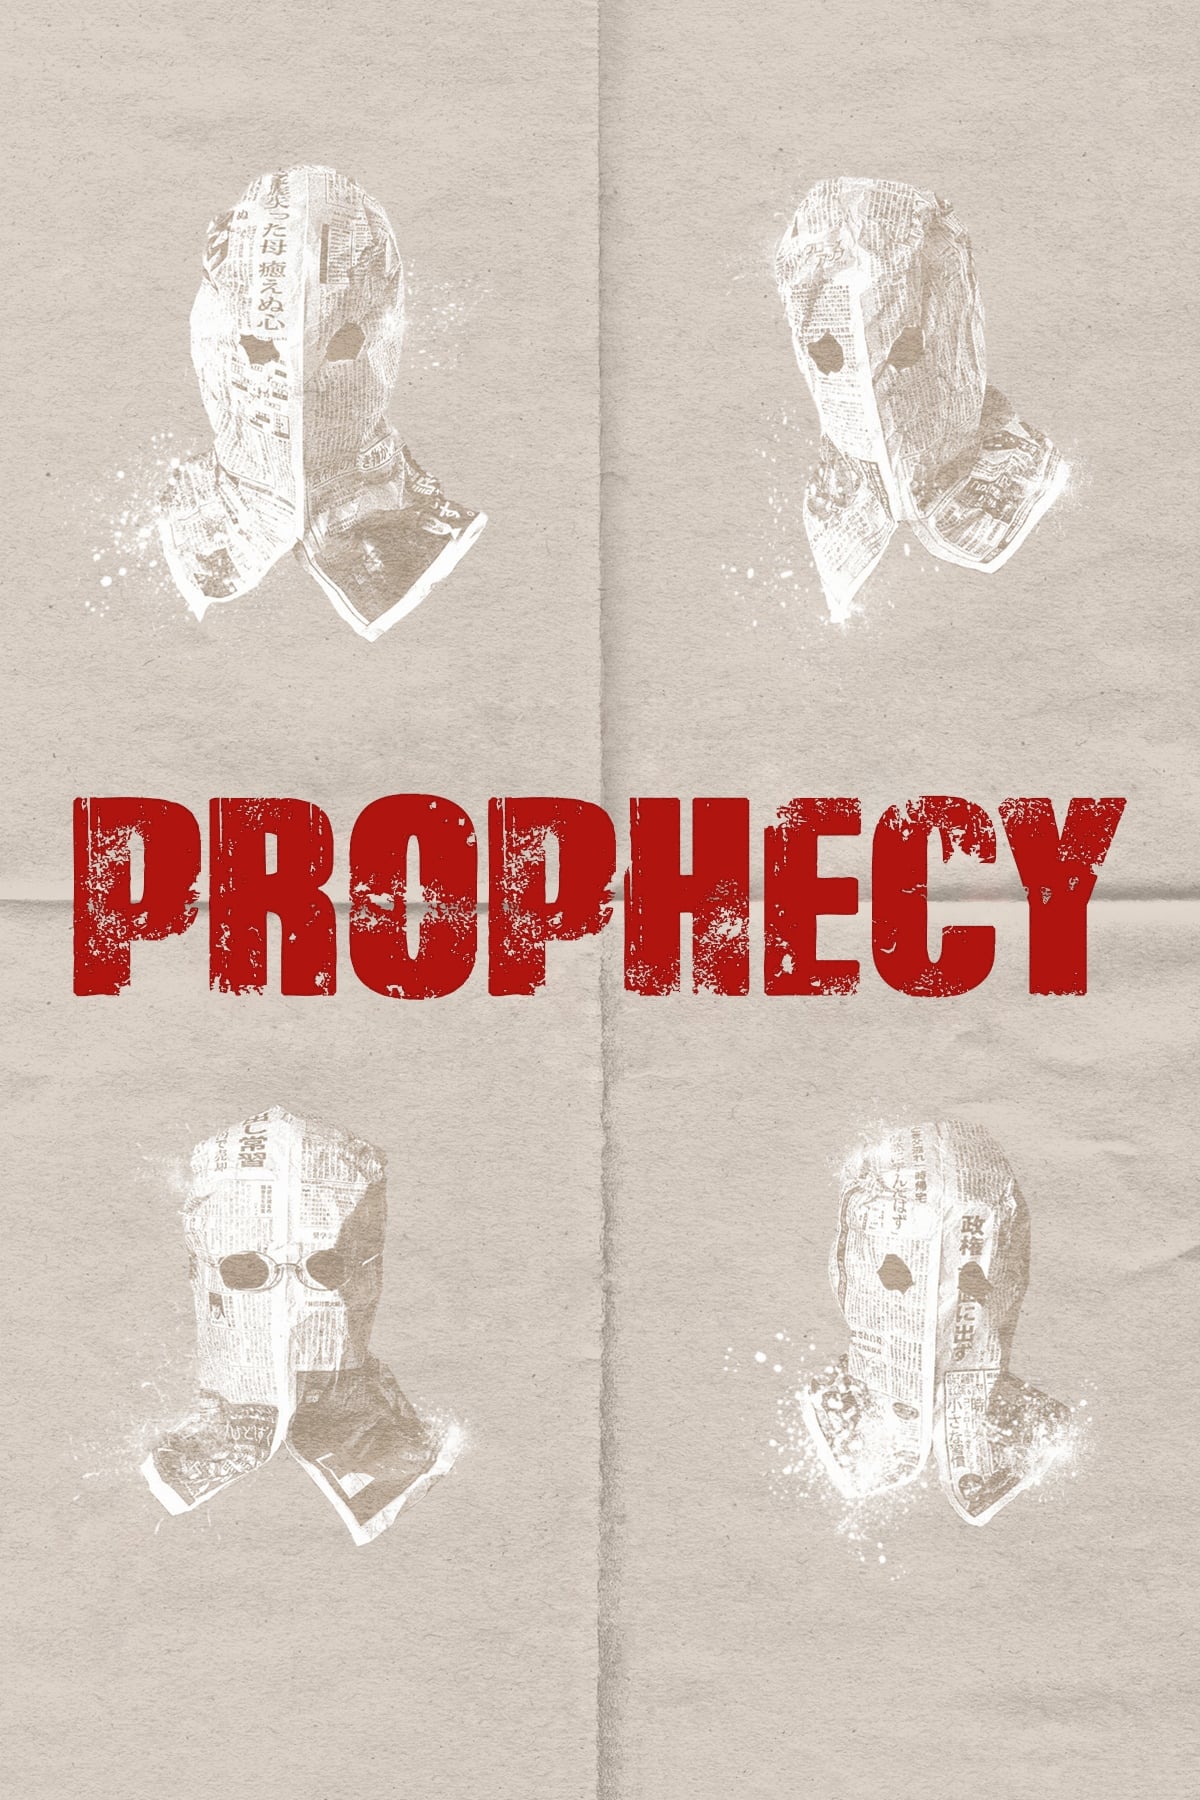 Prophecy (2015)